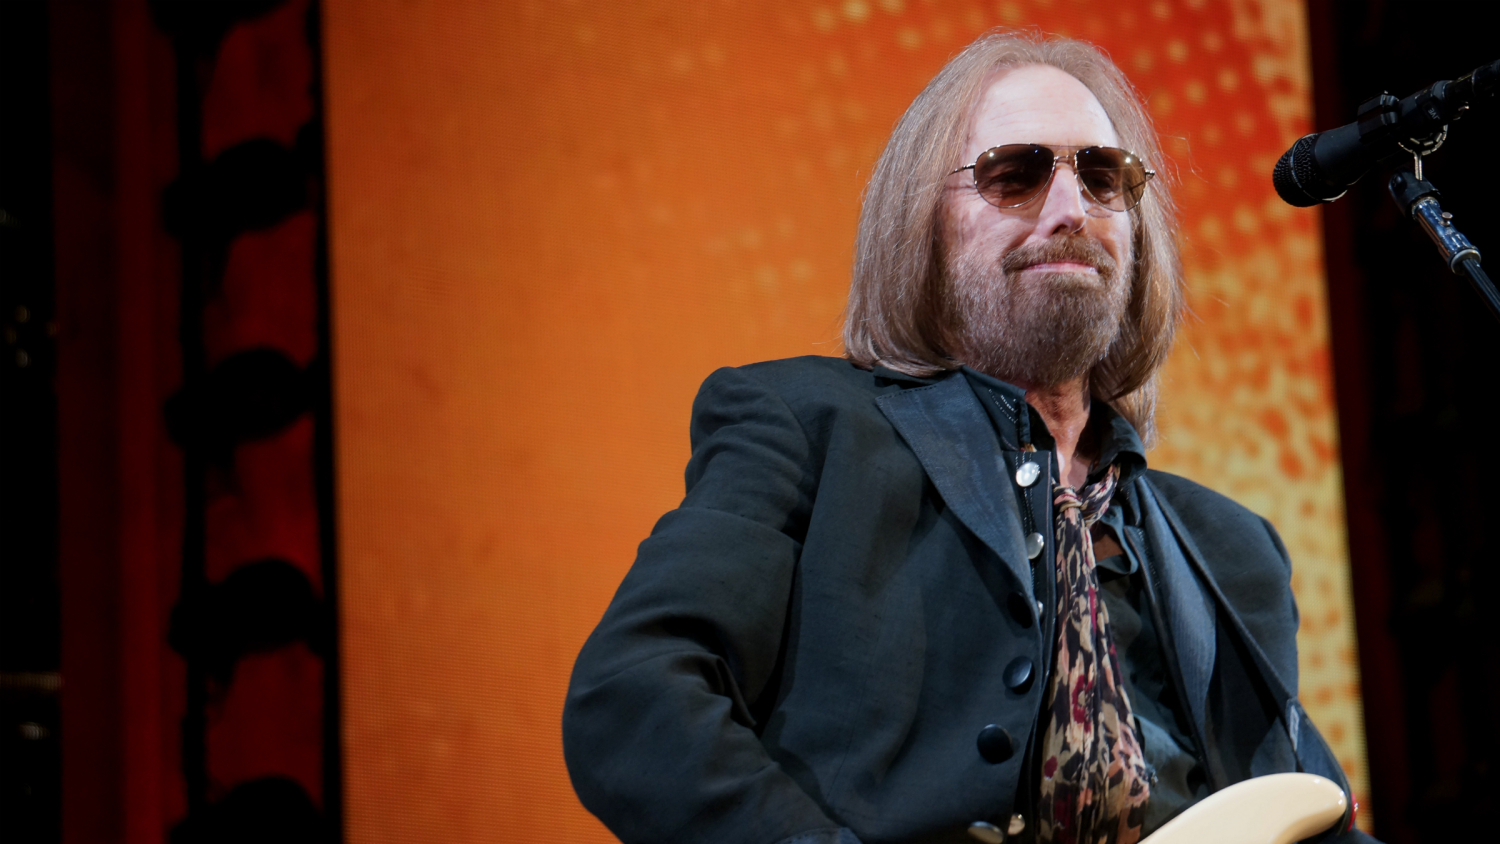 Musician Tom Petty found unconscious at his home